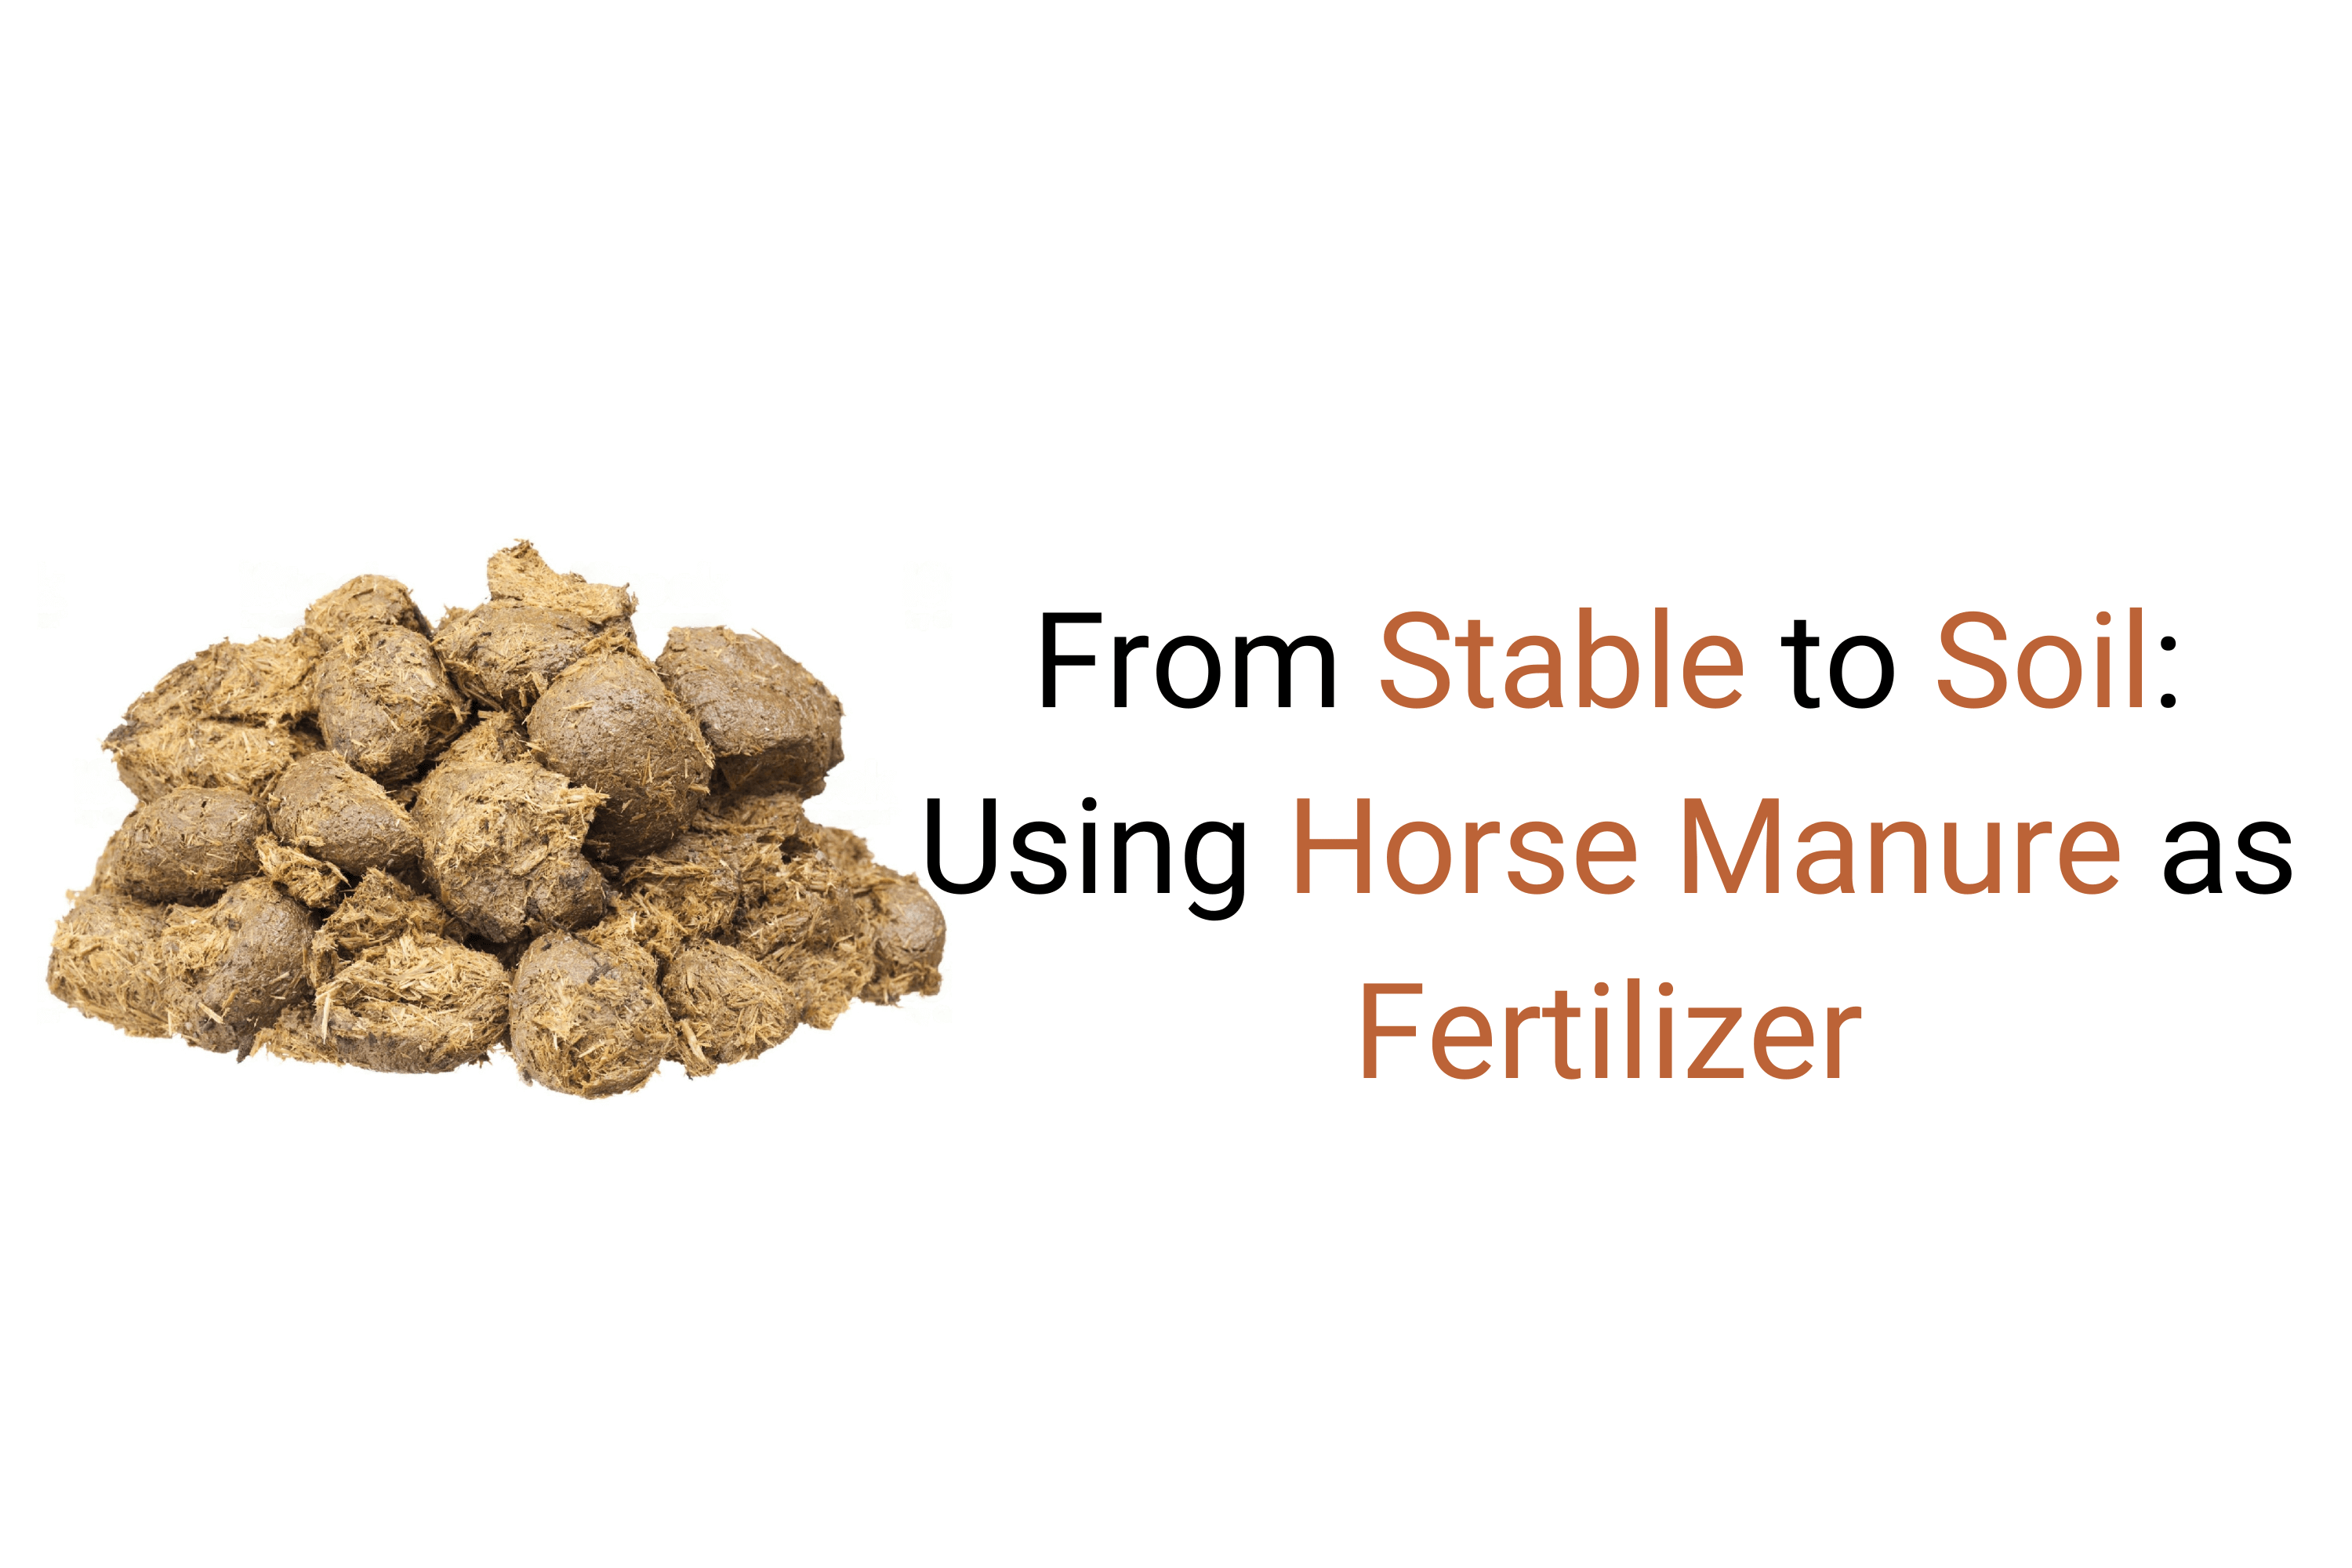 Can horse manure be used as fertilizer